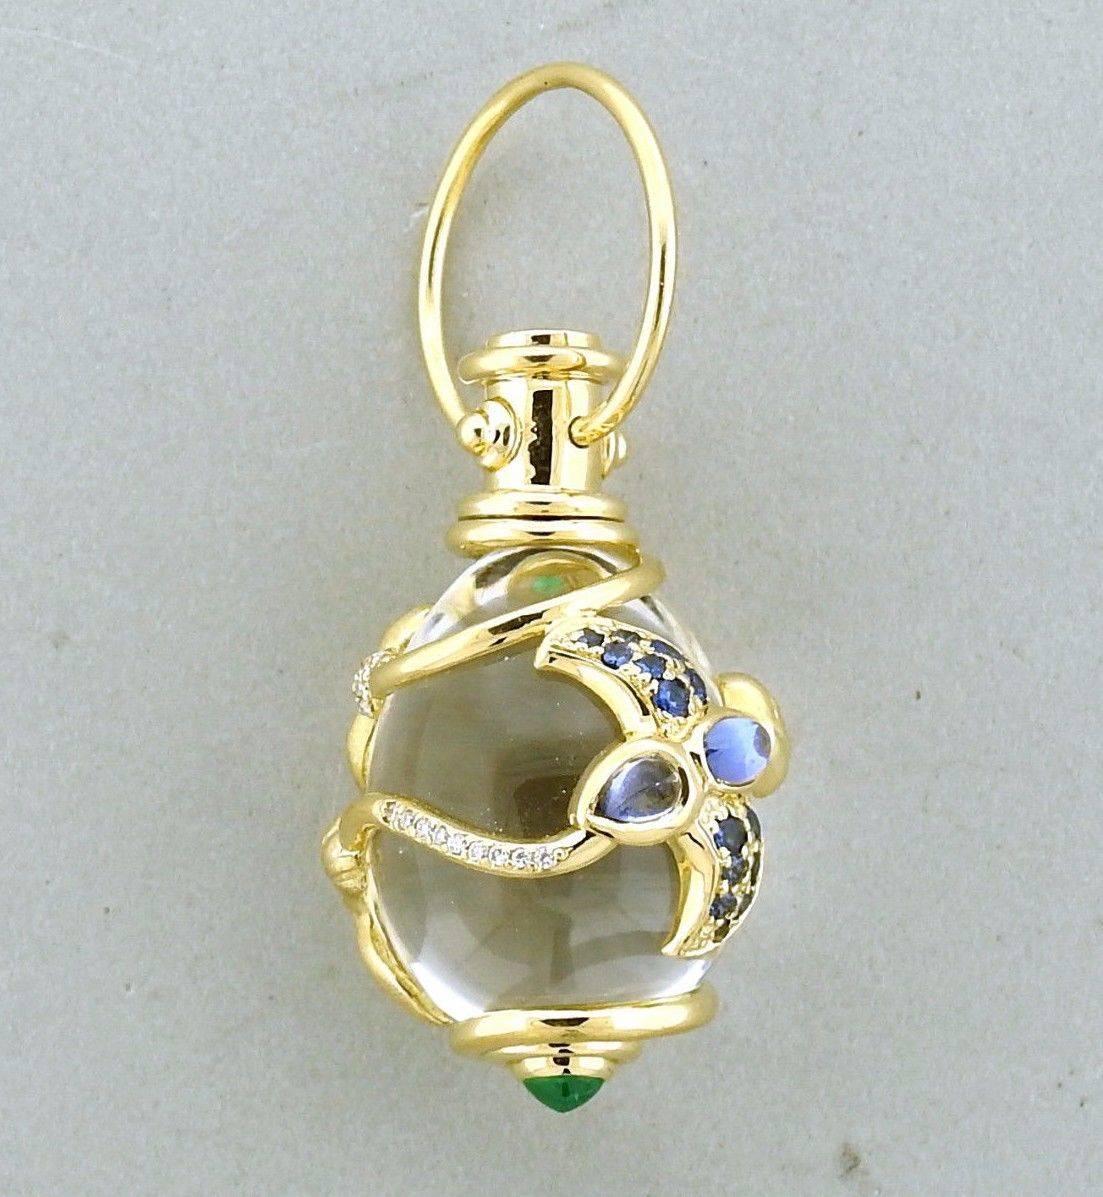 An 18k yellow gold crystal amulet pendant set with emeralds, tanzanite, sapphires and approximately 0.12ctw of G/VS diamonds.  The pendant without bale measures 35mm x 21mm, bale is 18mm in diameter.  The weight of the piece is 24.4 grams.  Marked: